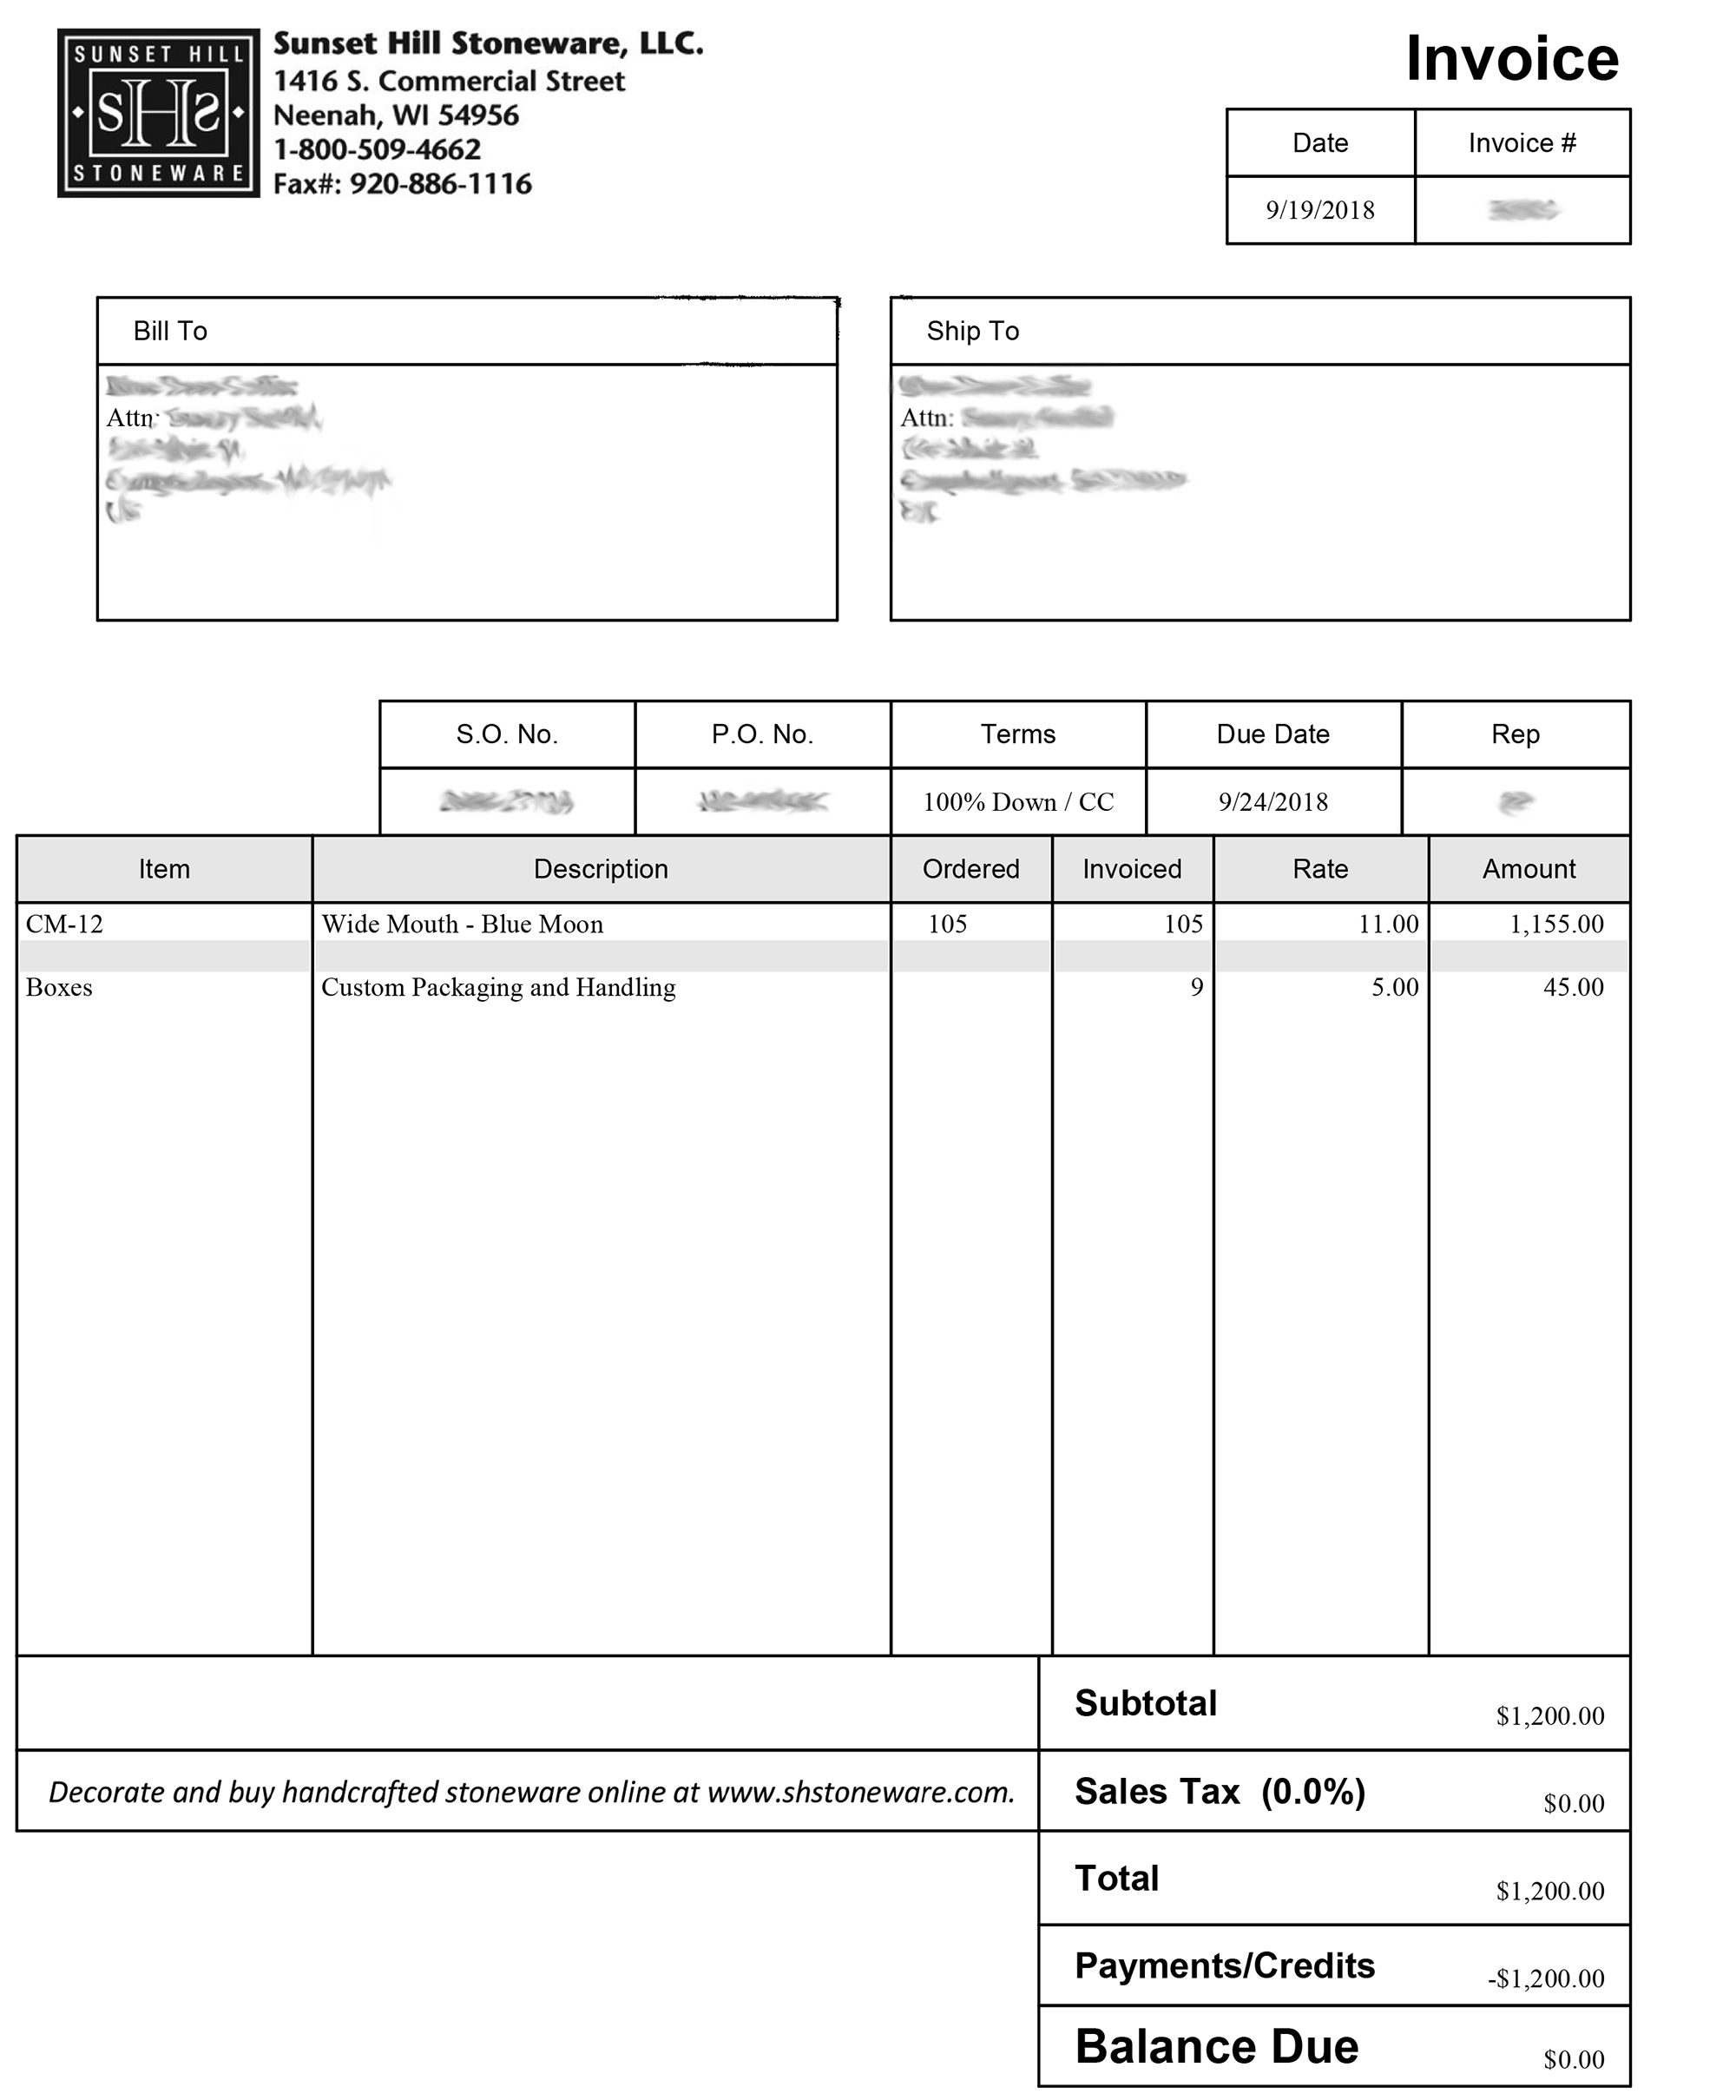 What is on my invoice?